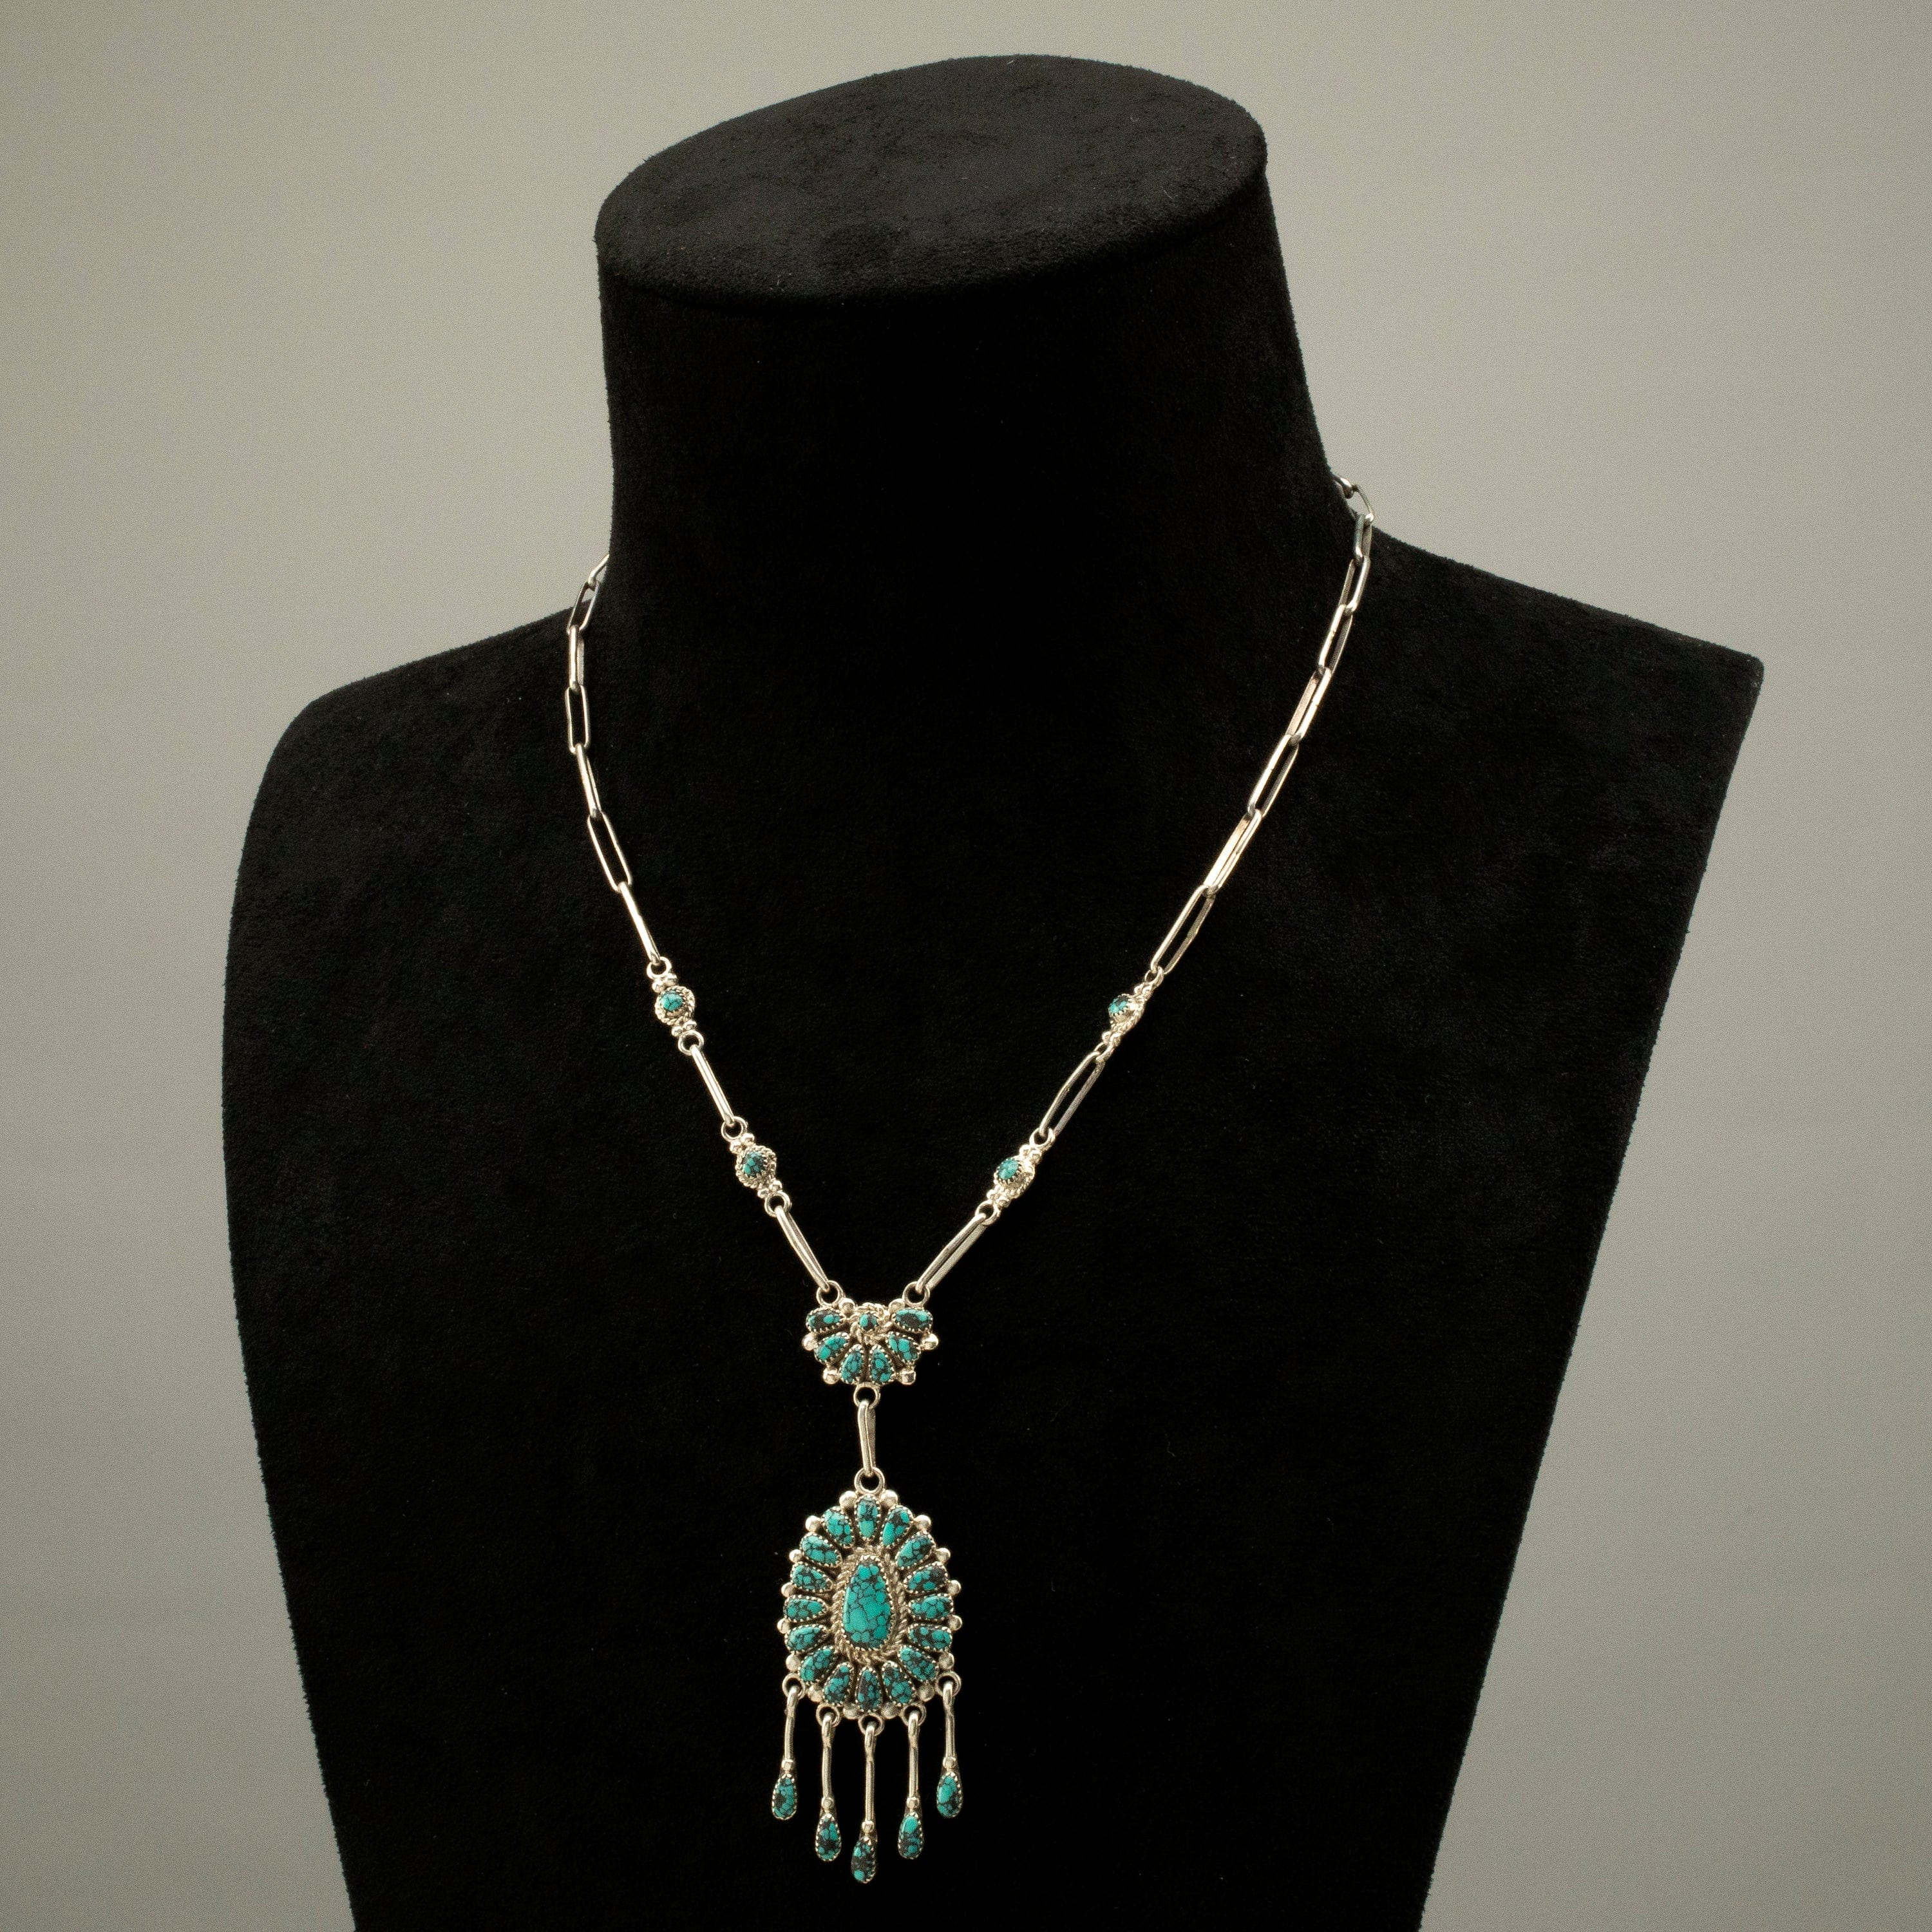 Kalifano Native American Jewelry L.W. Genuine Turquoise Navajo USA Native American Made 925 Sterling Silver Necklace & Earrings Set NAN700.015